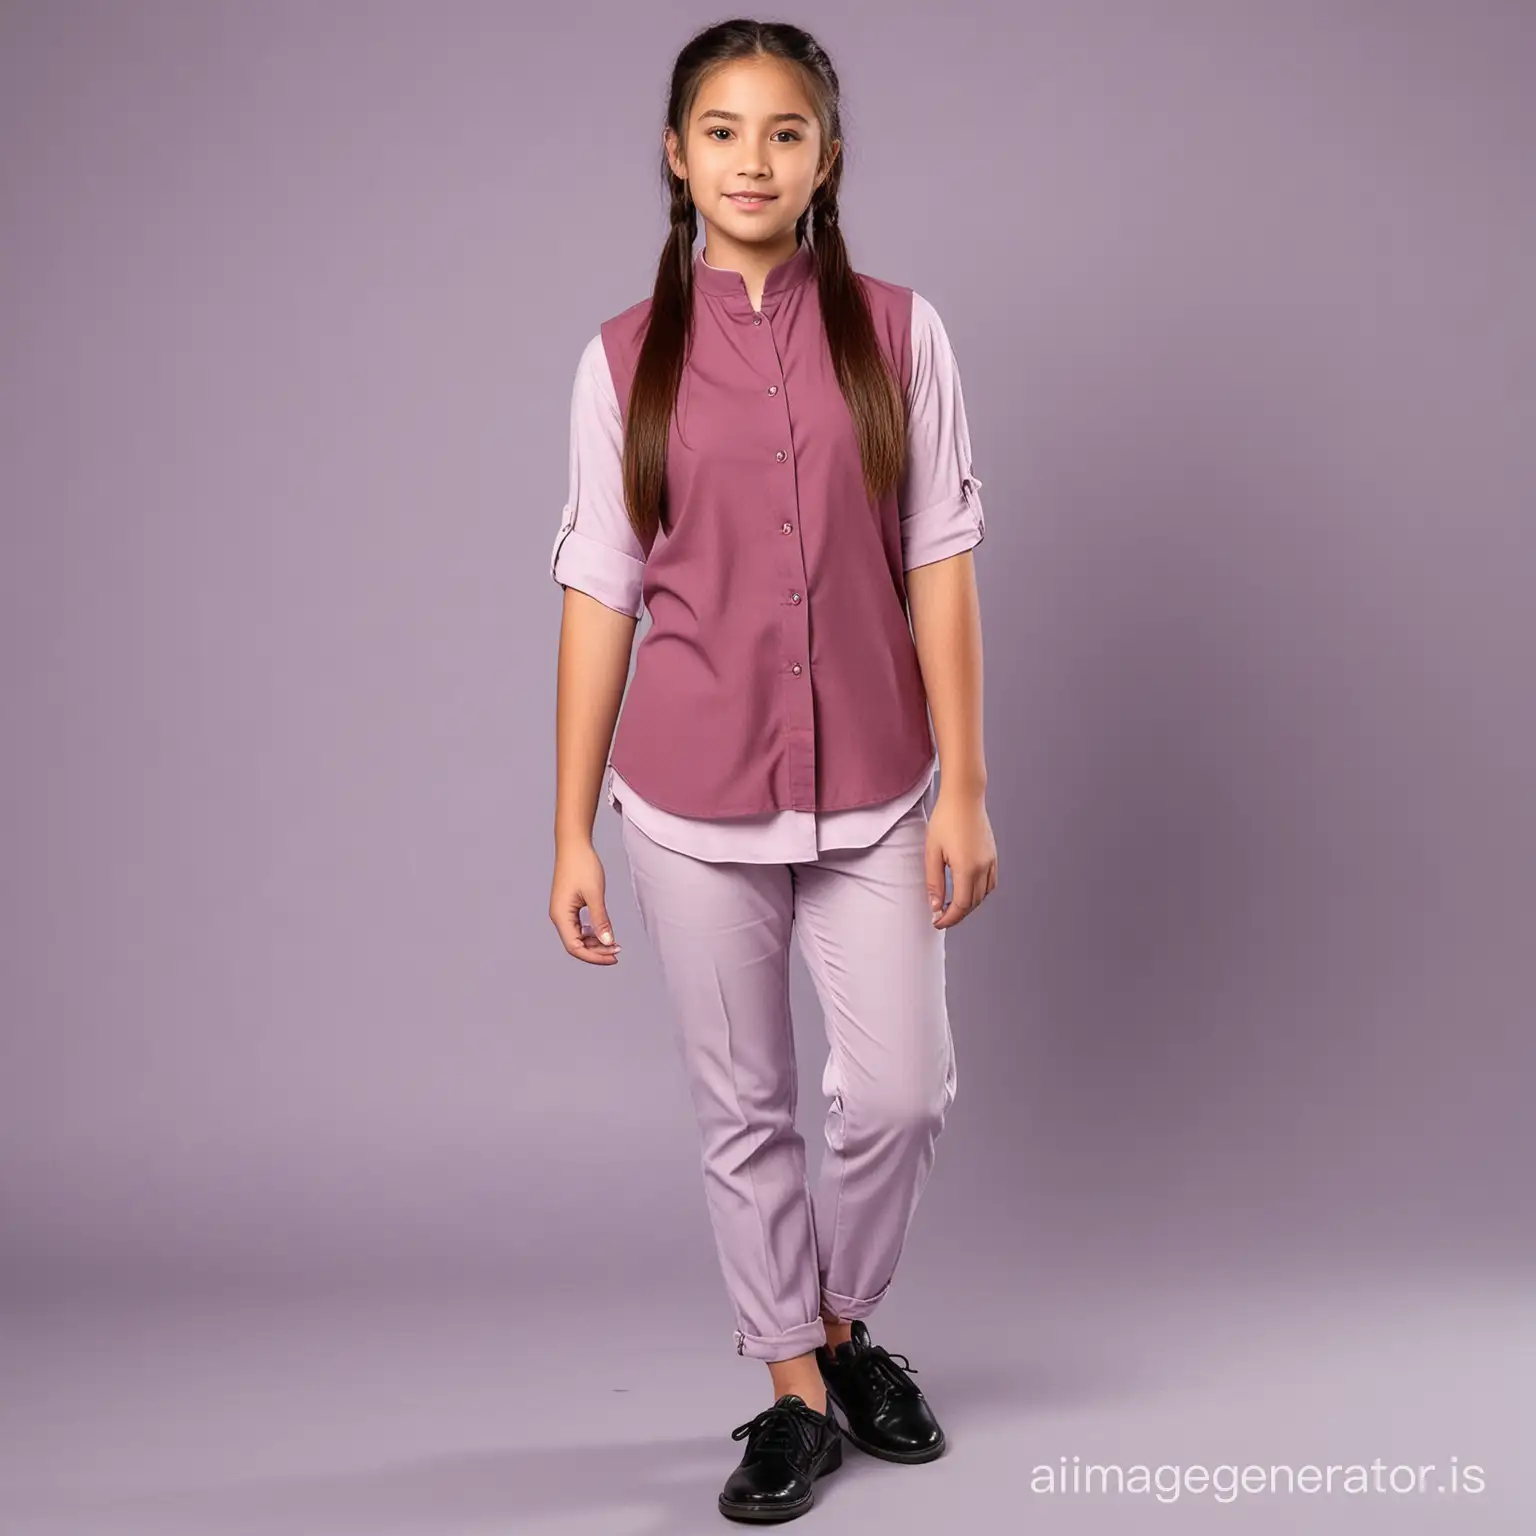 A 15 year old girl, facing camera, standing straight, wearing light lavender half sleeve shirt with chinese collar. Pony tailed hair. merlot color Vest over  light lavender full sleeve shirt, a merlot color full length pants. She has black school cut shoes on her foot